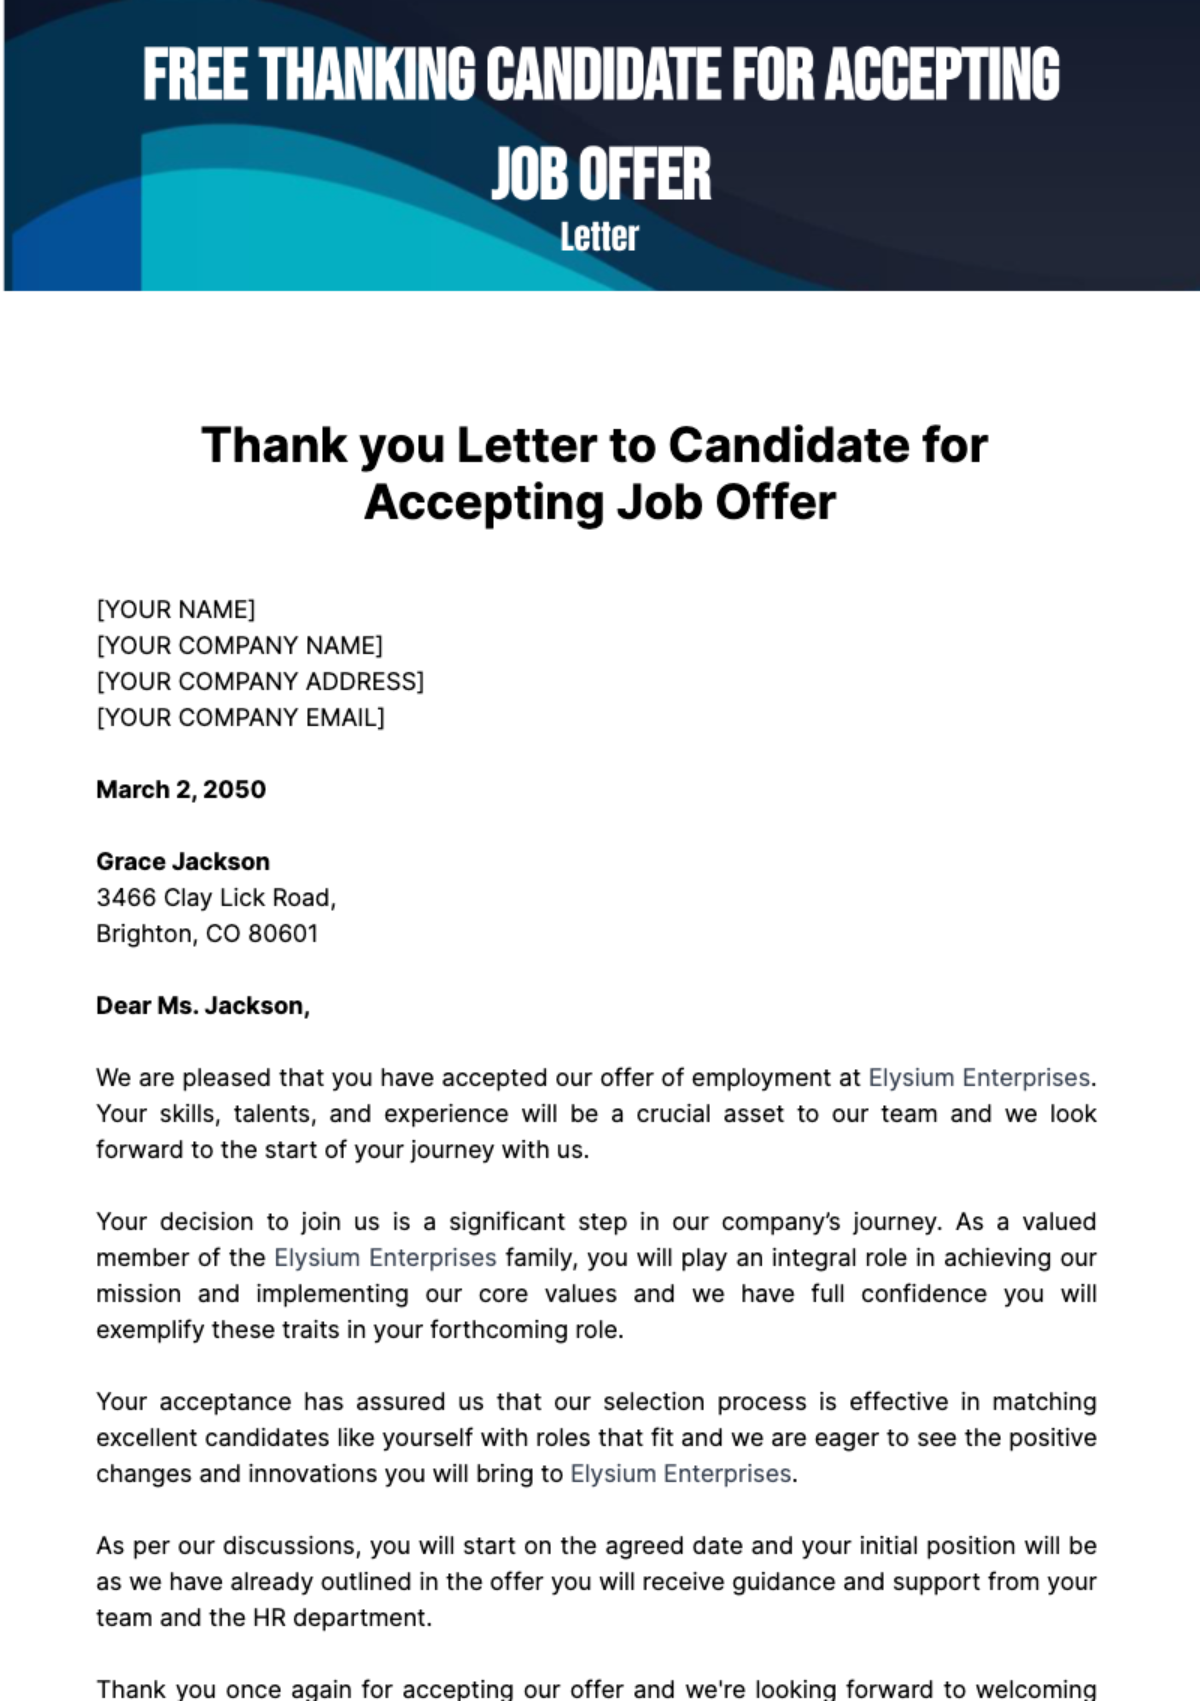 Free Thank you Letter to Candidate for Accepting Job Offer Template